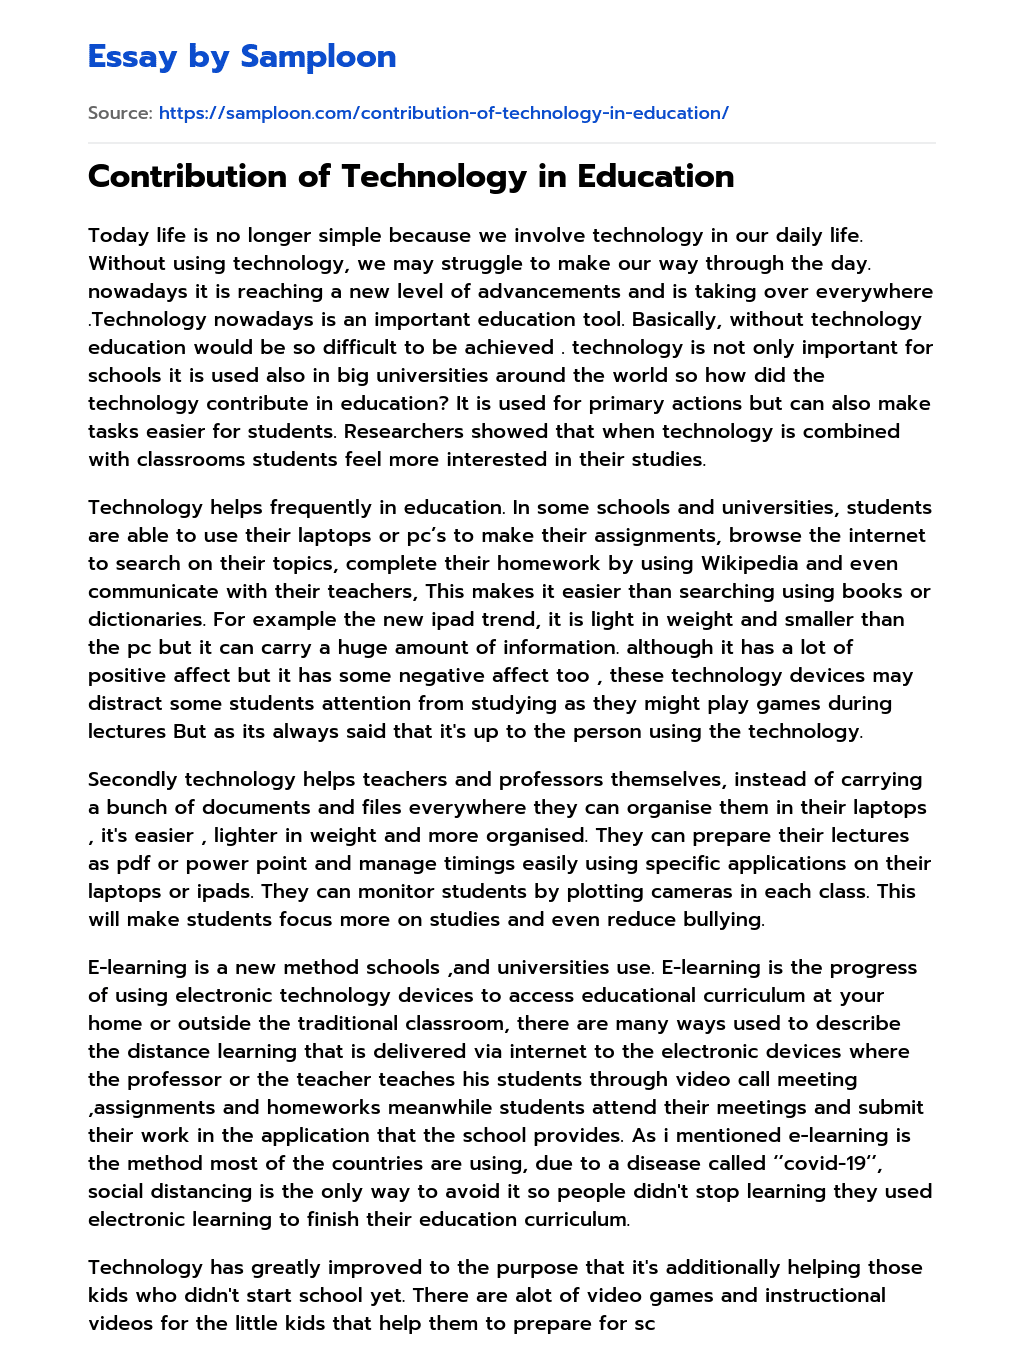 essay for technology in education